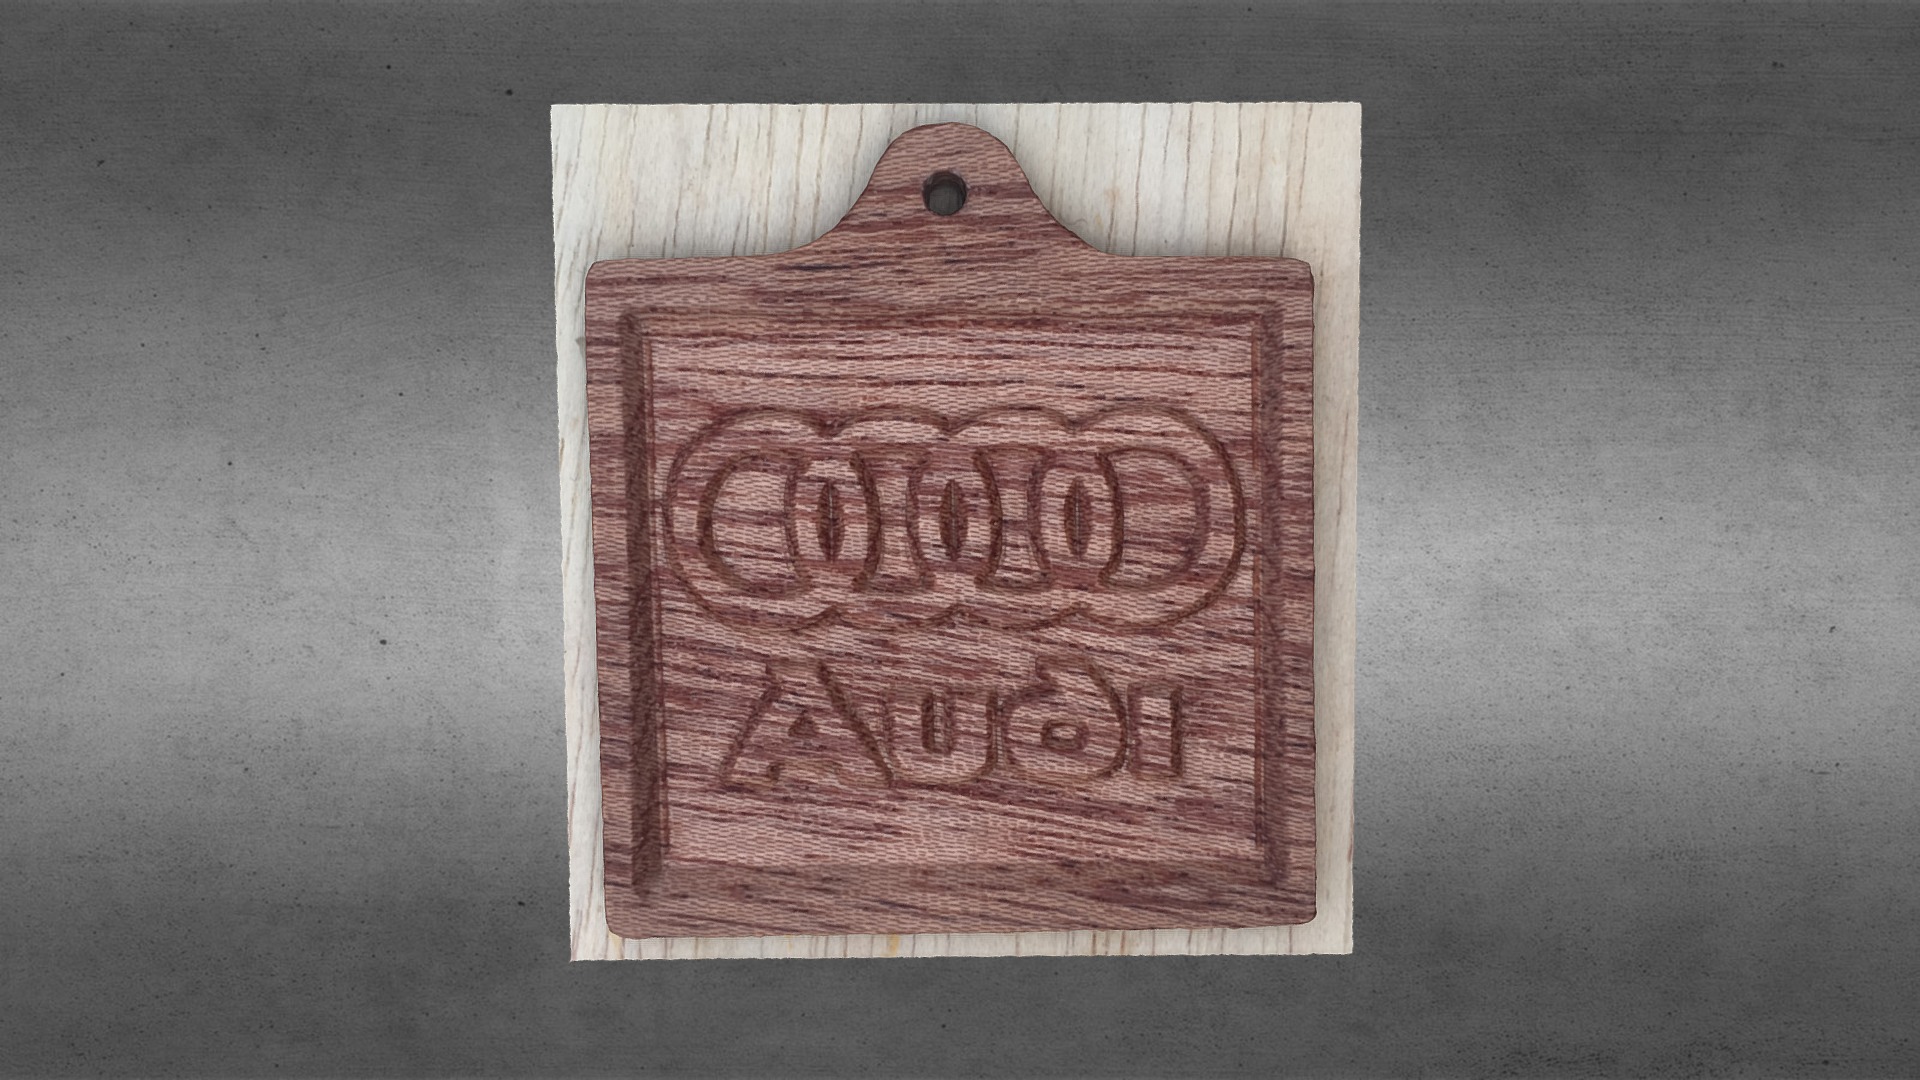 3D model Audi logo – mahogany wood 3d scan - This is a 3D model of the Audi logo - mahogany wood 3d scan. The 3D model is about a wood box with a label on it.